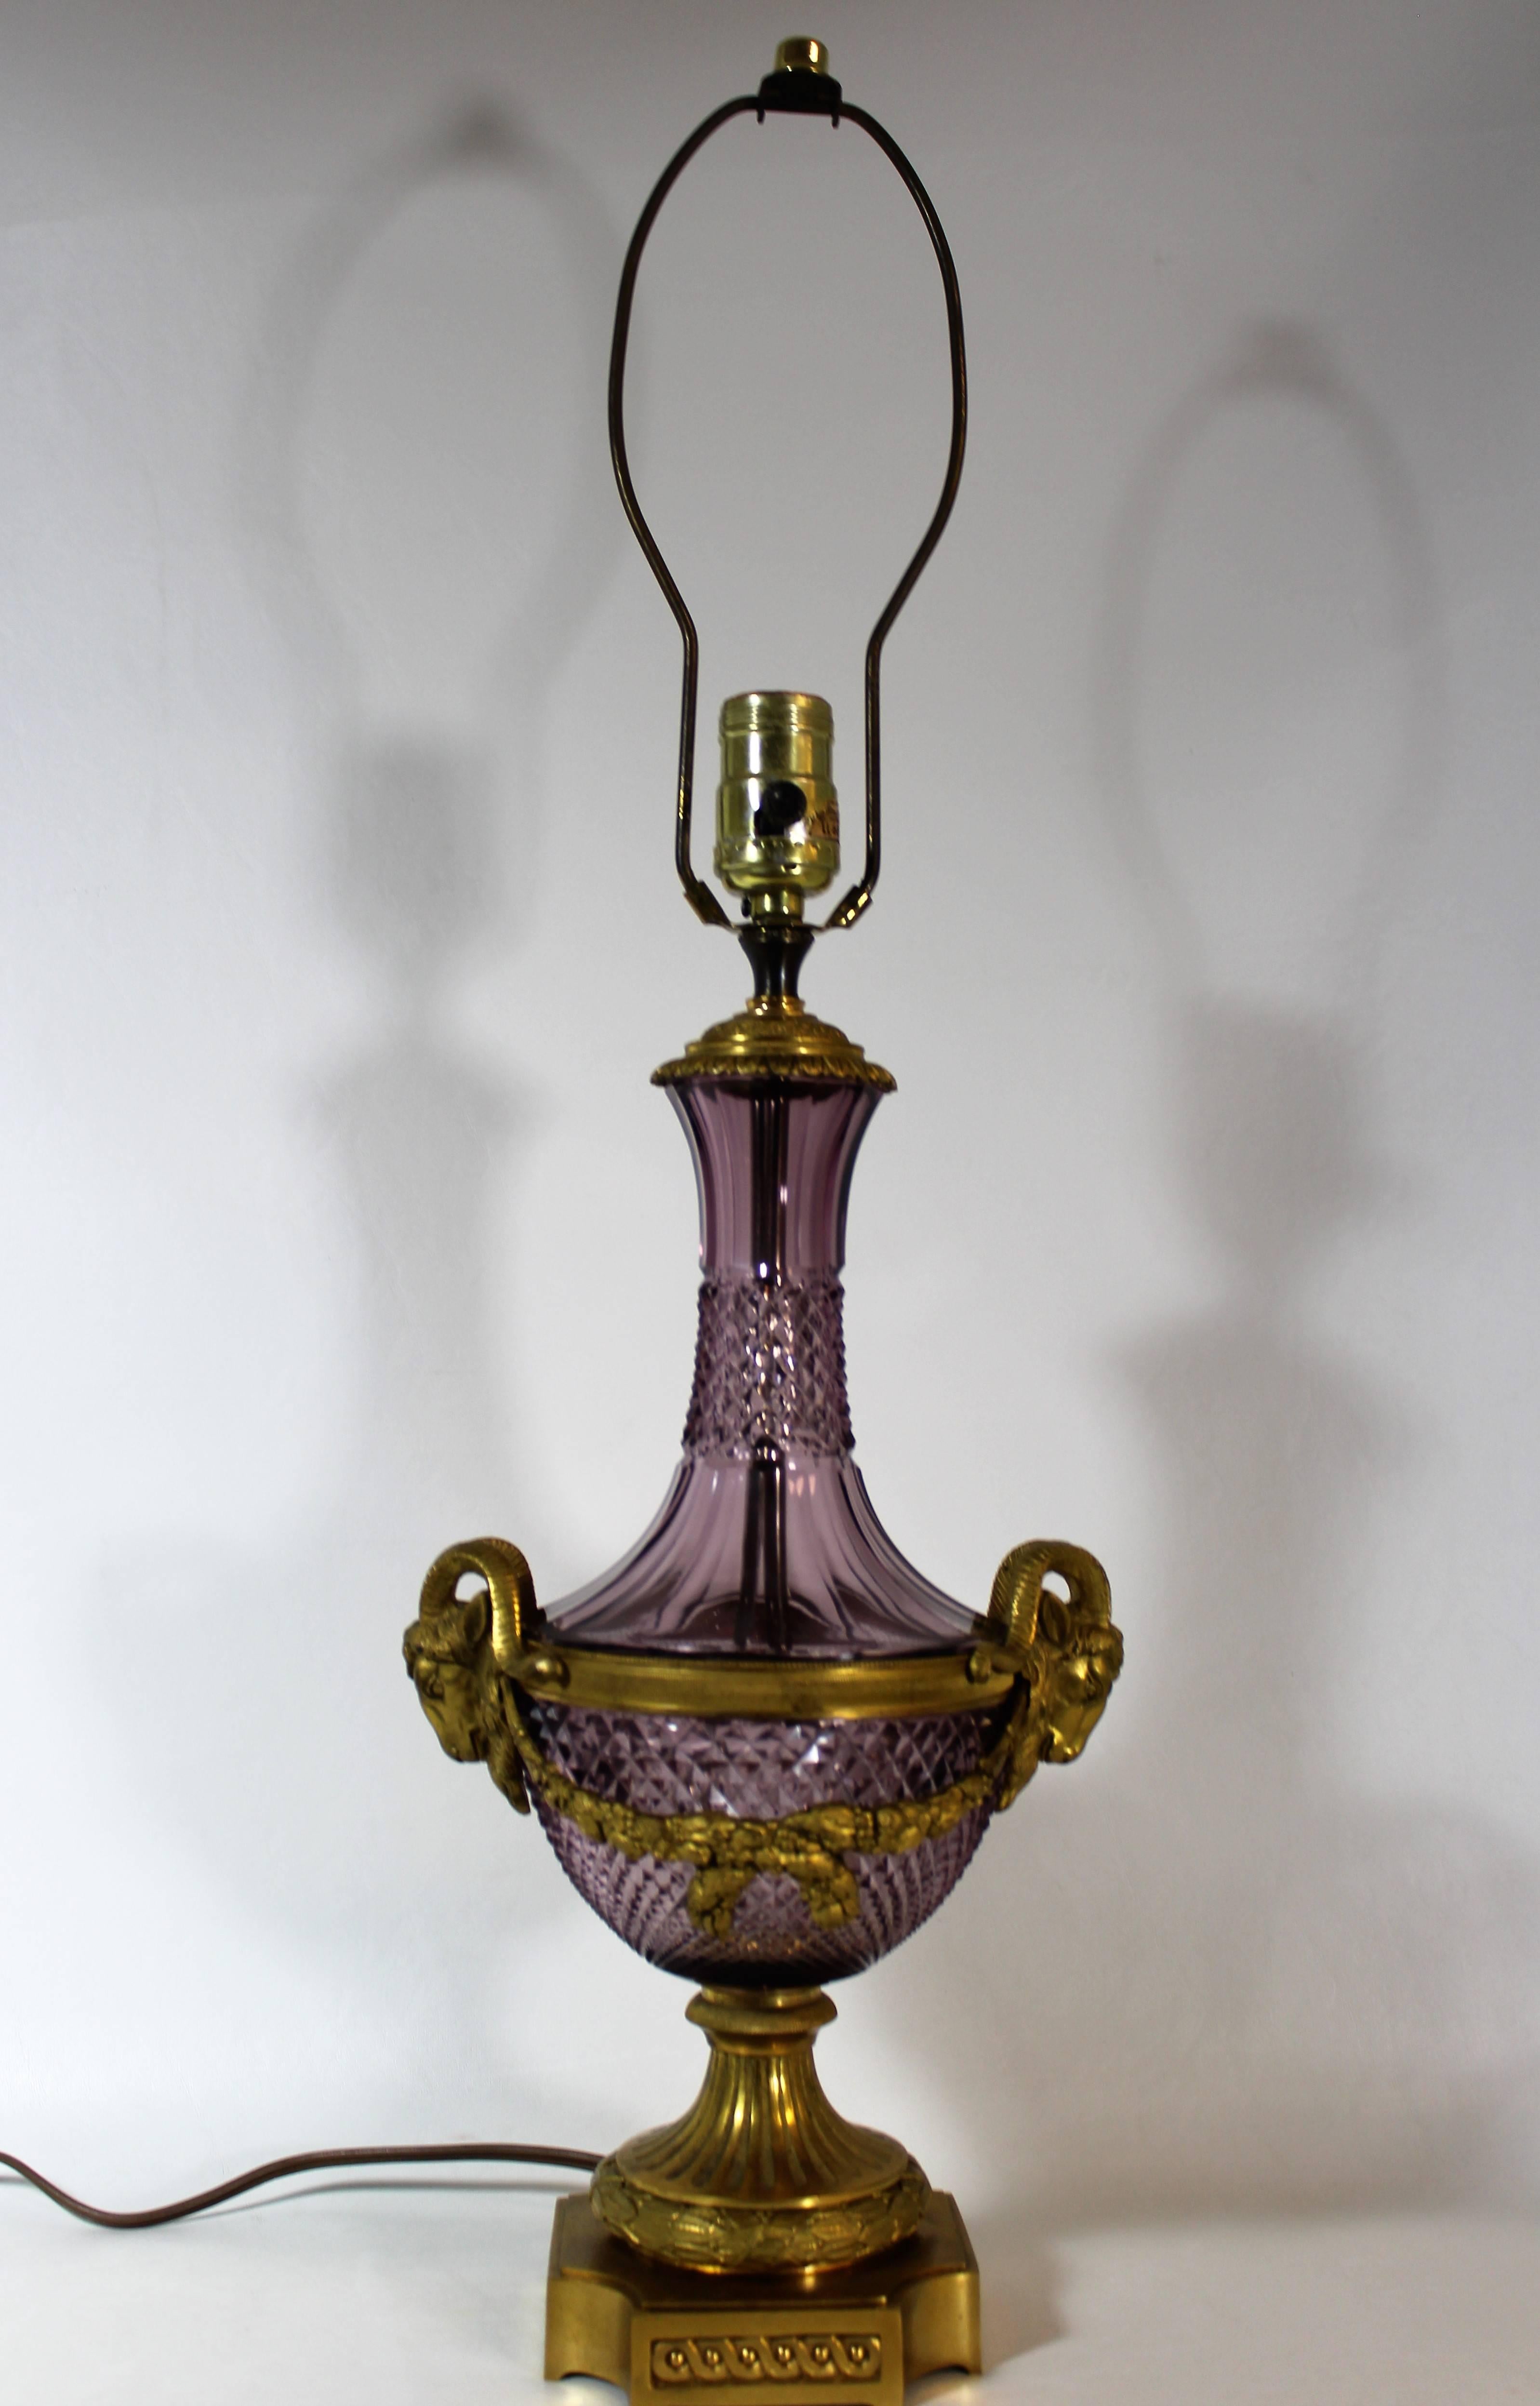 Elaborate Austrian bronze ormolu adorns this pair of amethyst crystal Baccarat lamps. Each lamp is beautifully decorated in the Classic French Louis XVI style, with gilt bronze rams heads and floral swags flanking each side. Boasting a complex cut